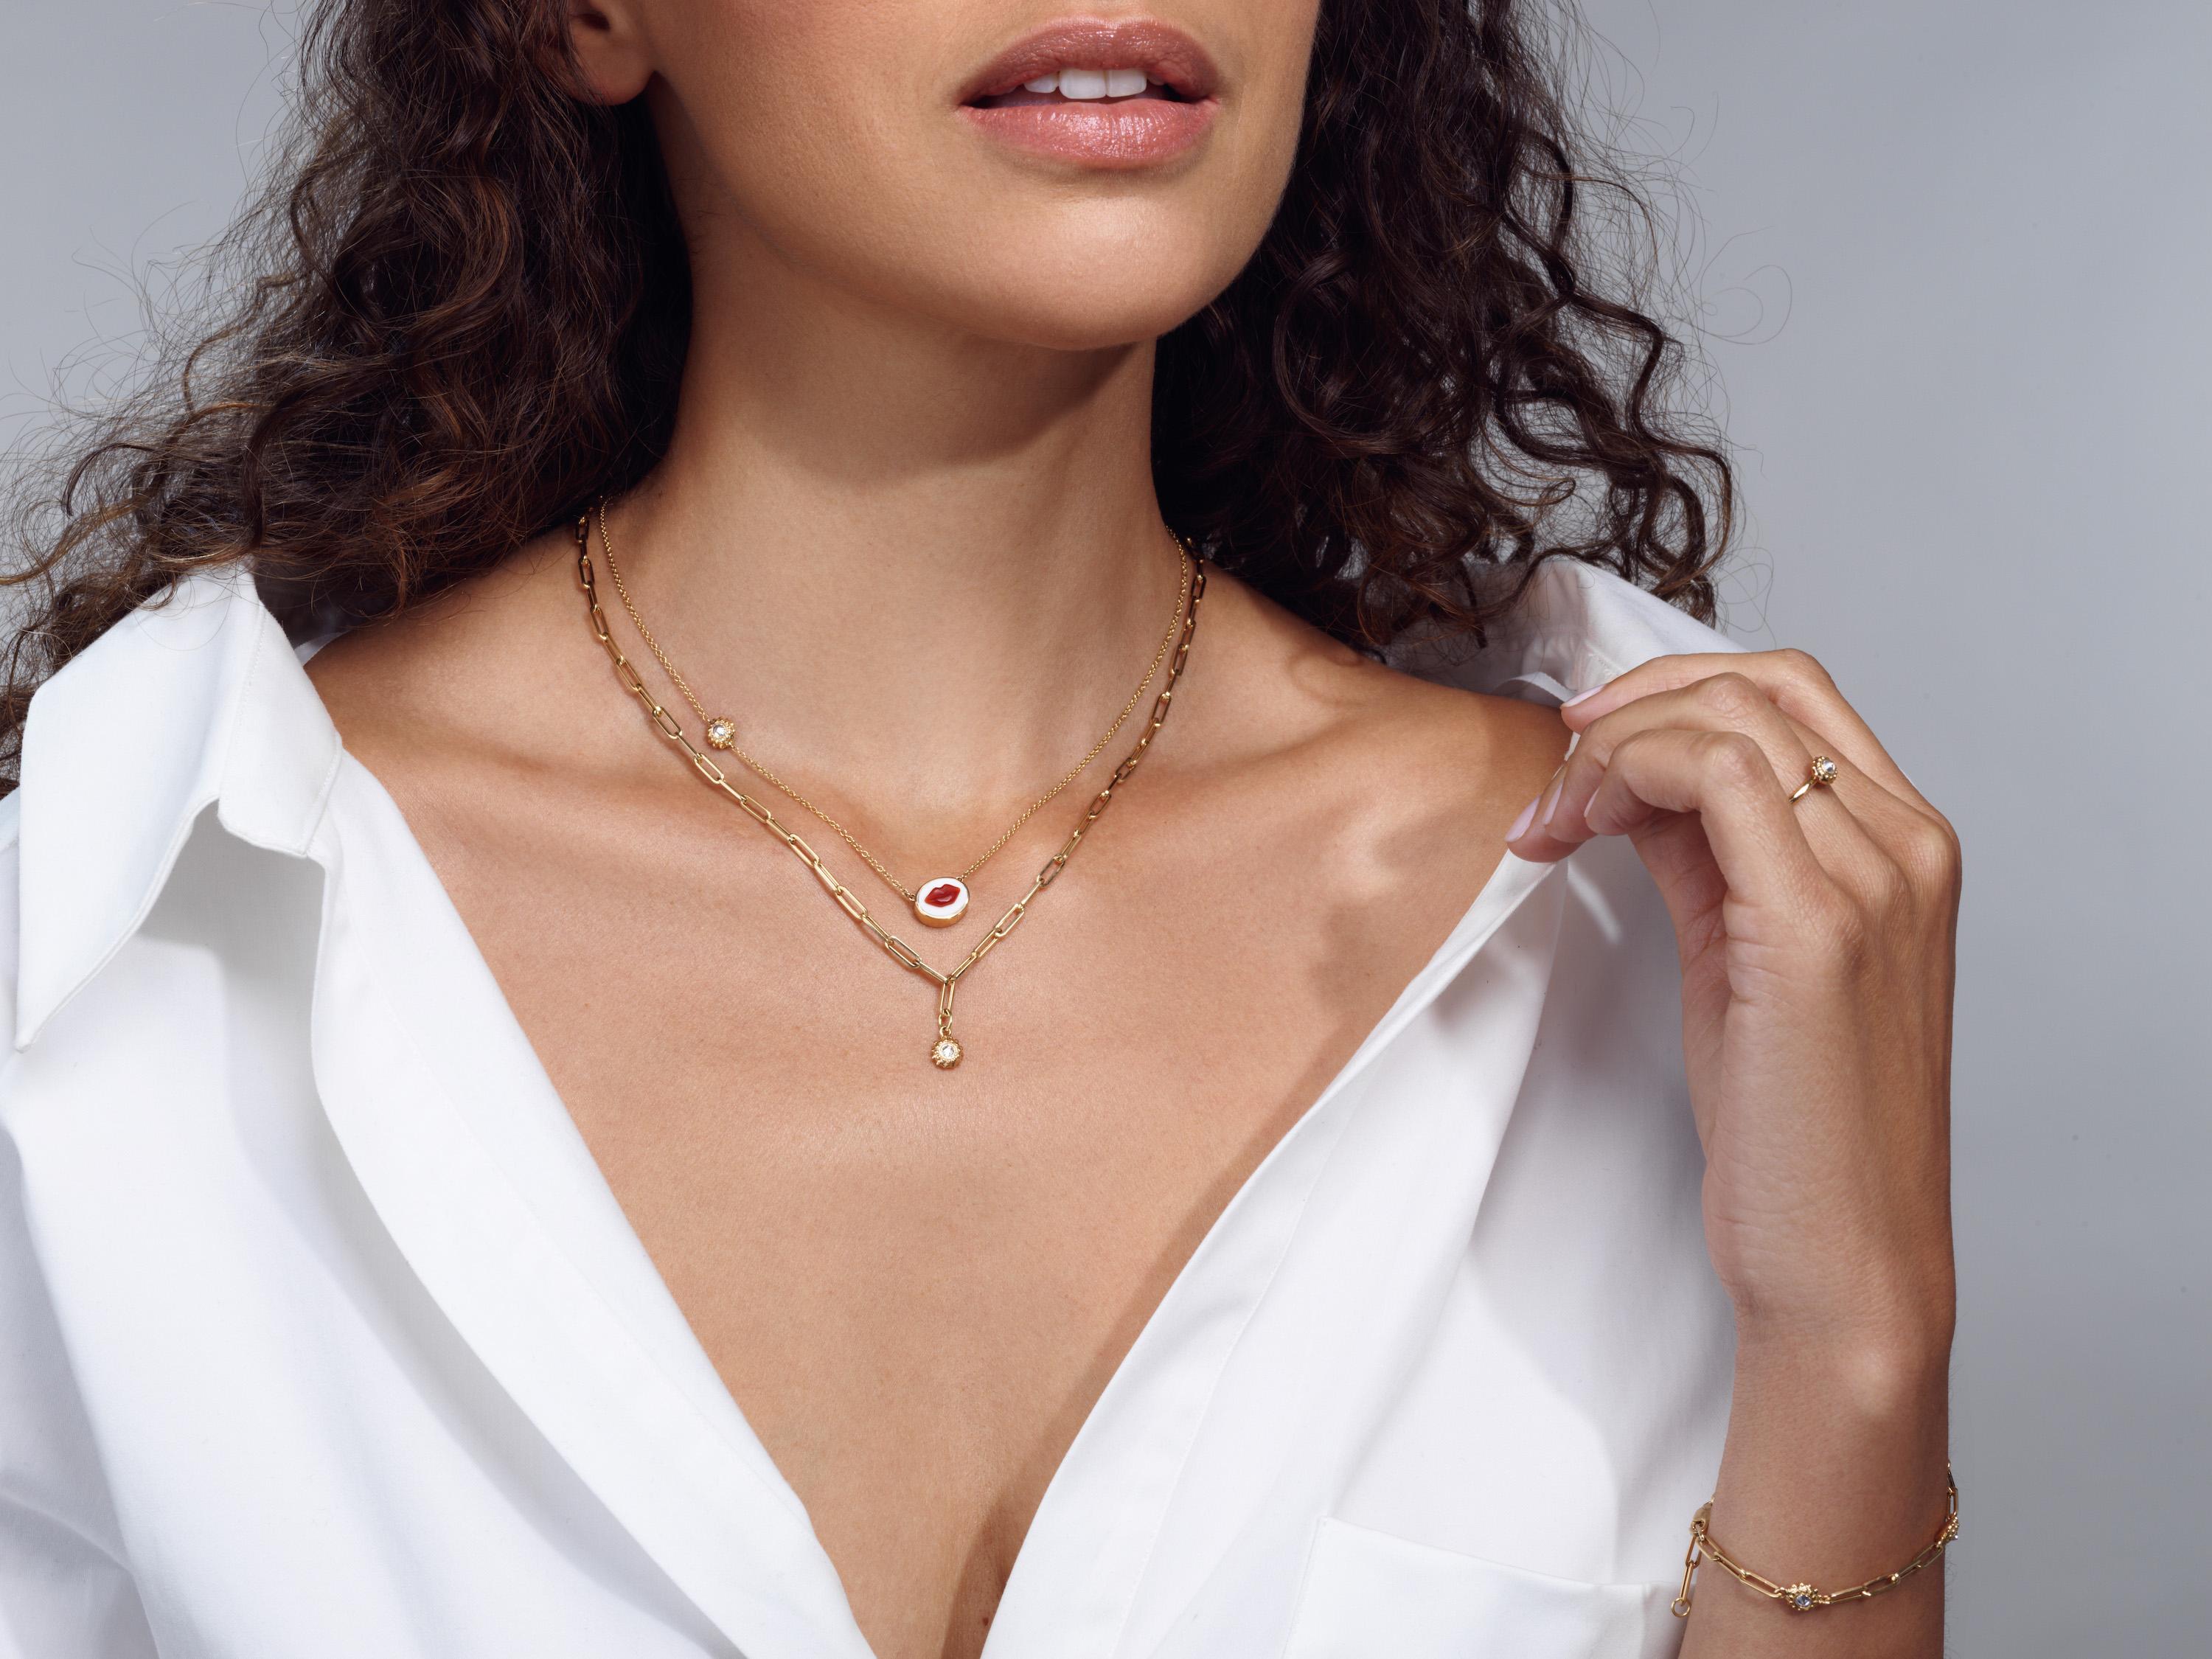 'Lady is a Tramp' cameo charm pendant is a work of art! The cameo is hand carved in Brazilian red agate and encircled in 18k rose gold.  The ajure back reveals the word 'LOVE' to remind us of the 'Lover within’.

Details:

Brazilian Red Agate, 18k